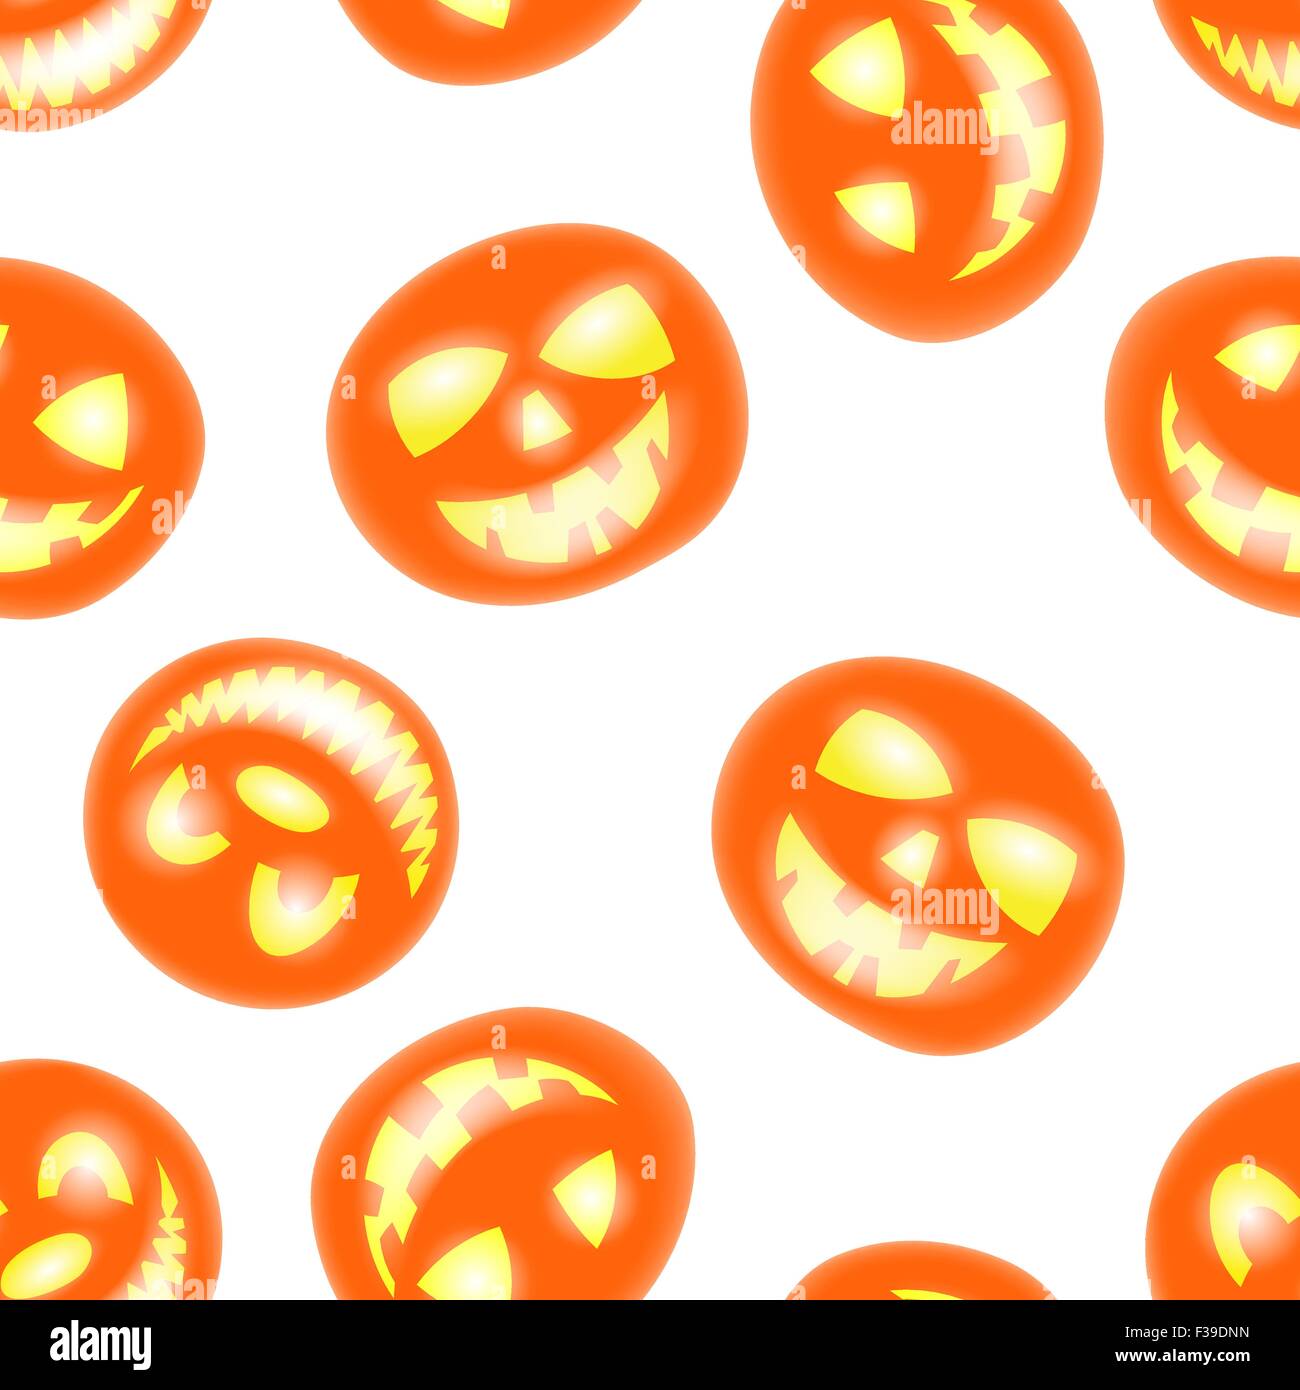 Halloween holiday seamless pattern with smiling pumpkins over white background for creating Halloween designs.  Vector illustration. Stock Vector